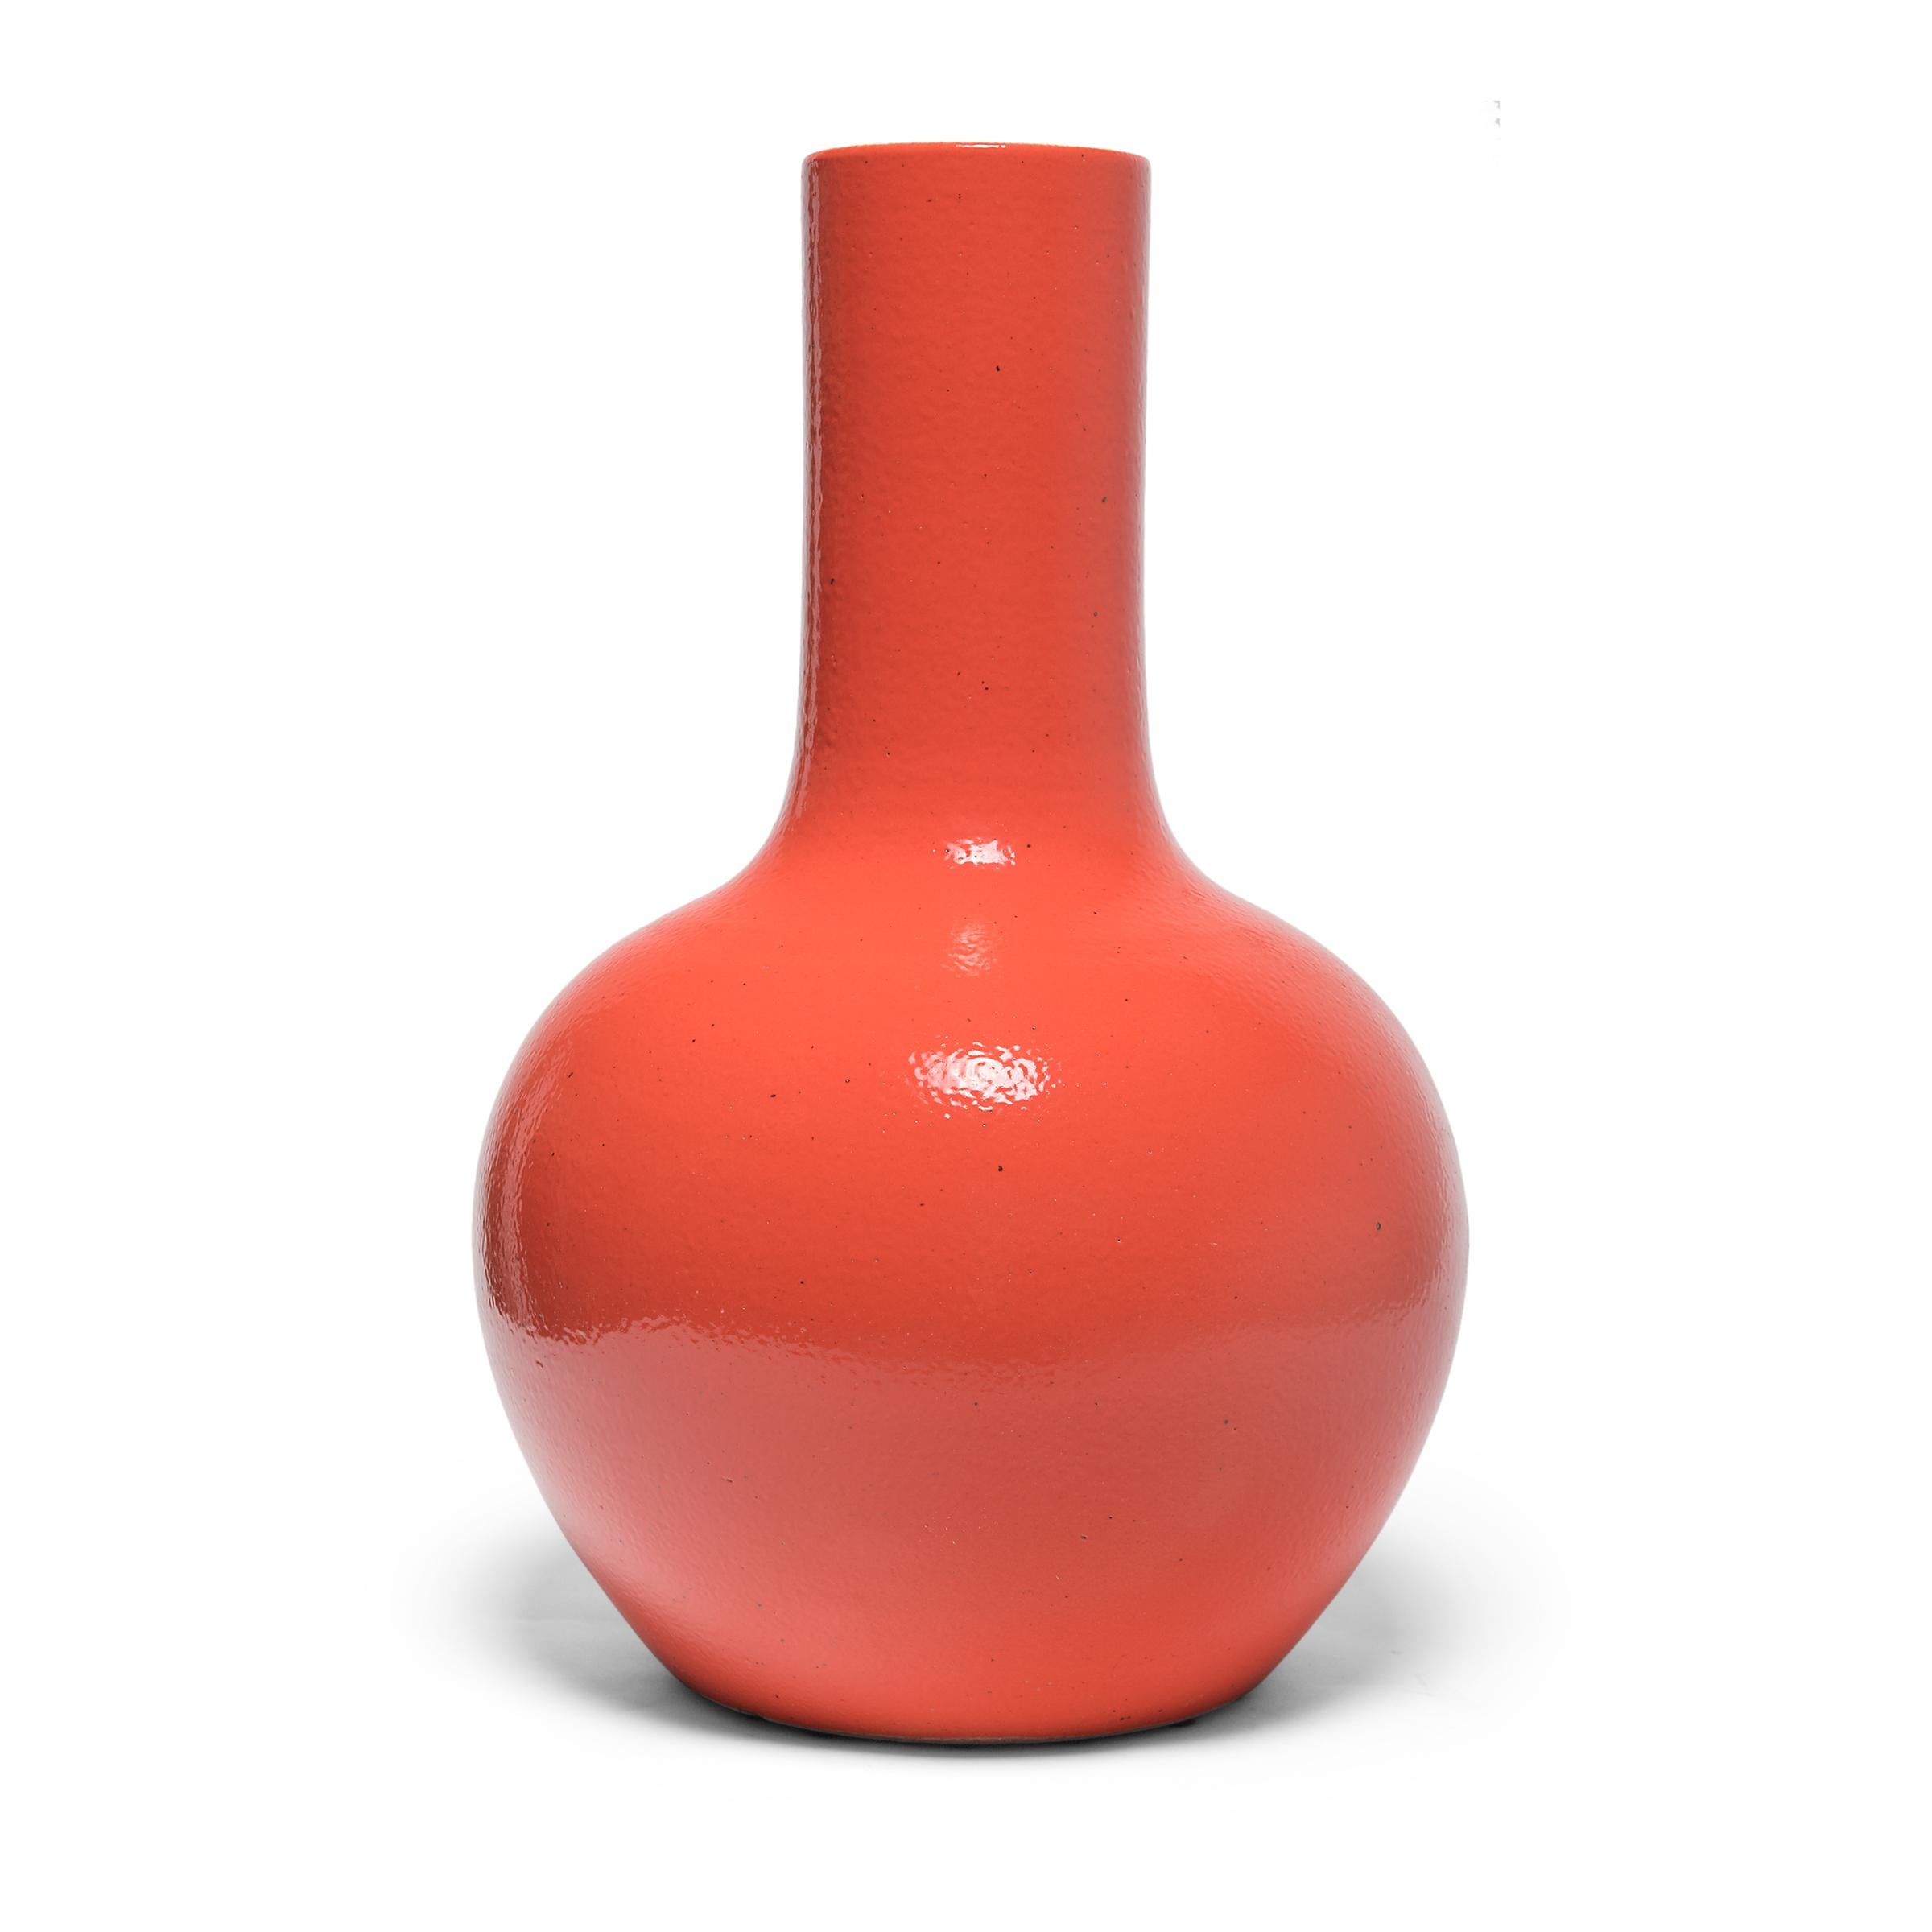 Drawing on a long Chinese tradition of monochrome ceramics, this tall gooseneck vase is glazed in vibrant persimmon-orange glaze. The vase features a rounded, globular body and a narrow cylindrical neck, a classic form known as 'tianqiuping' or